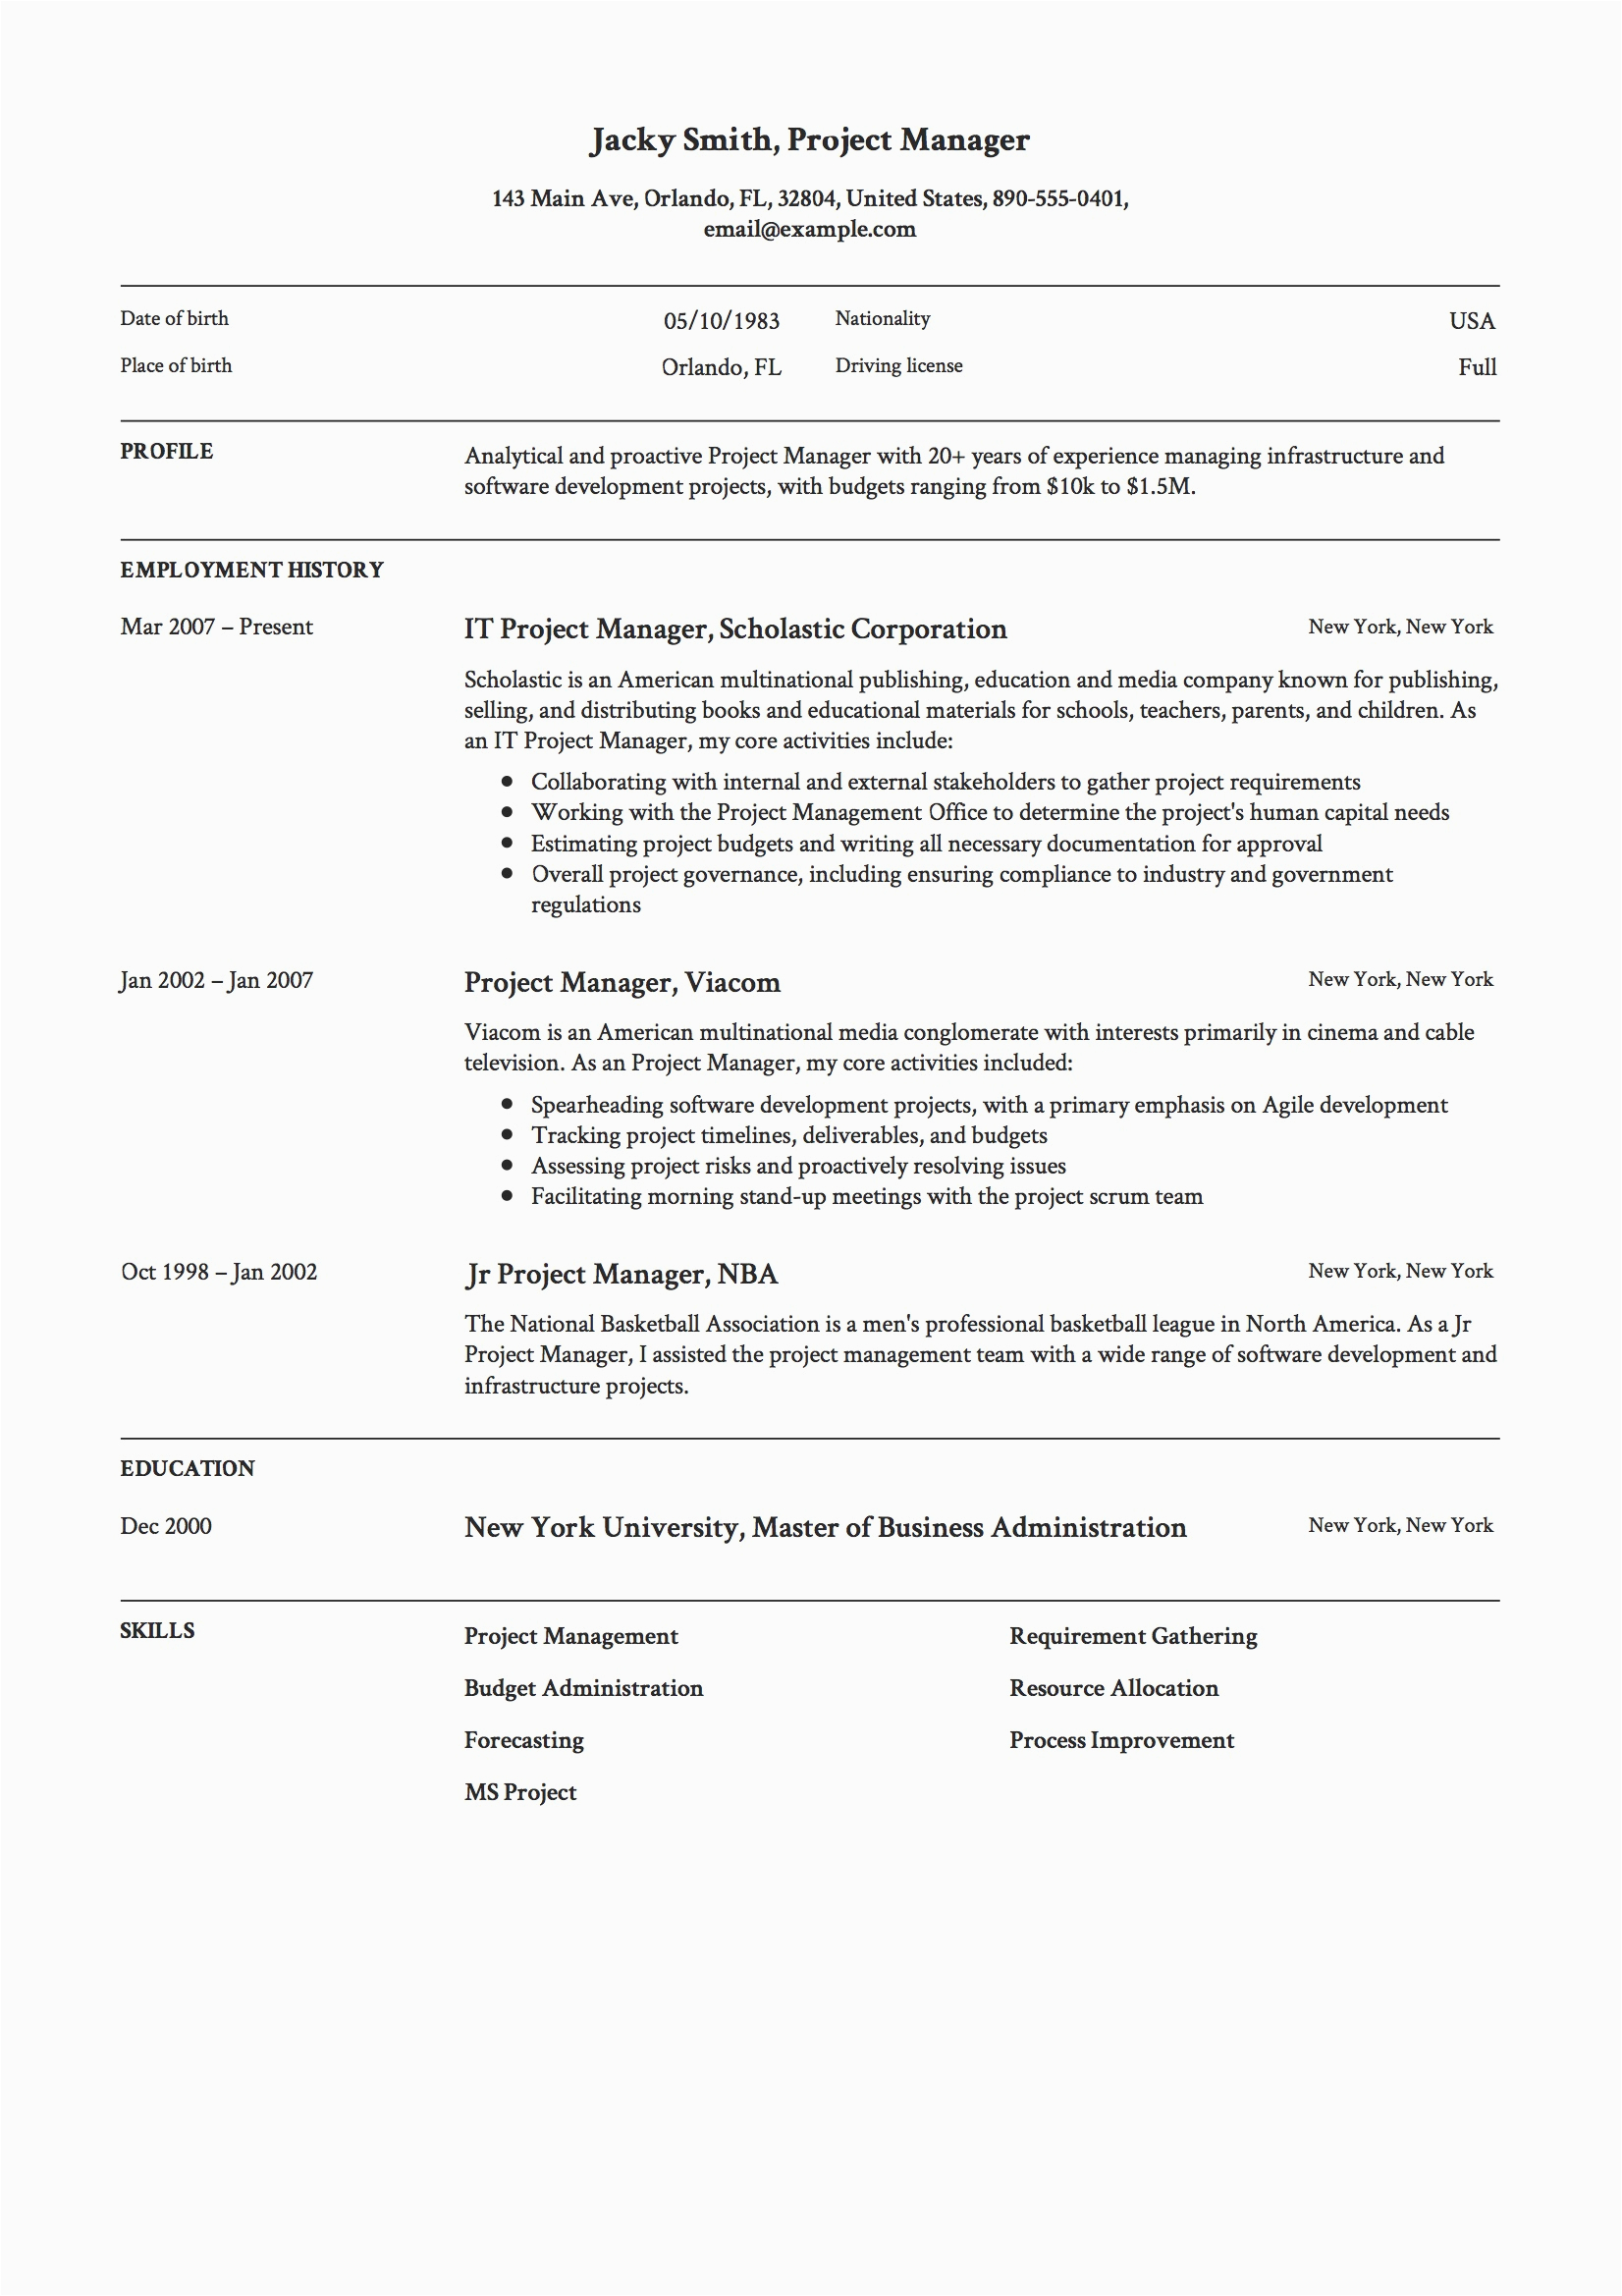 Project Manager Resume Template Free Download 76 Free Resume Templates [2021] Pdf & Word Downloads